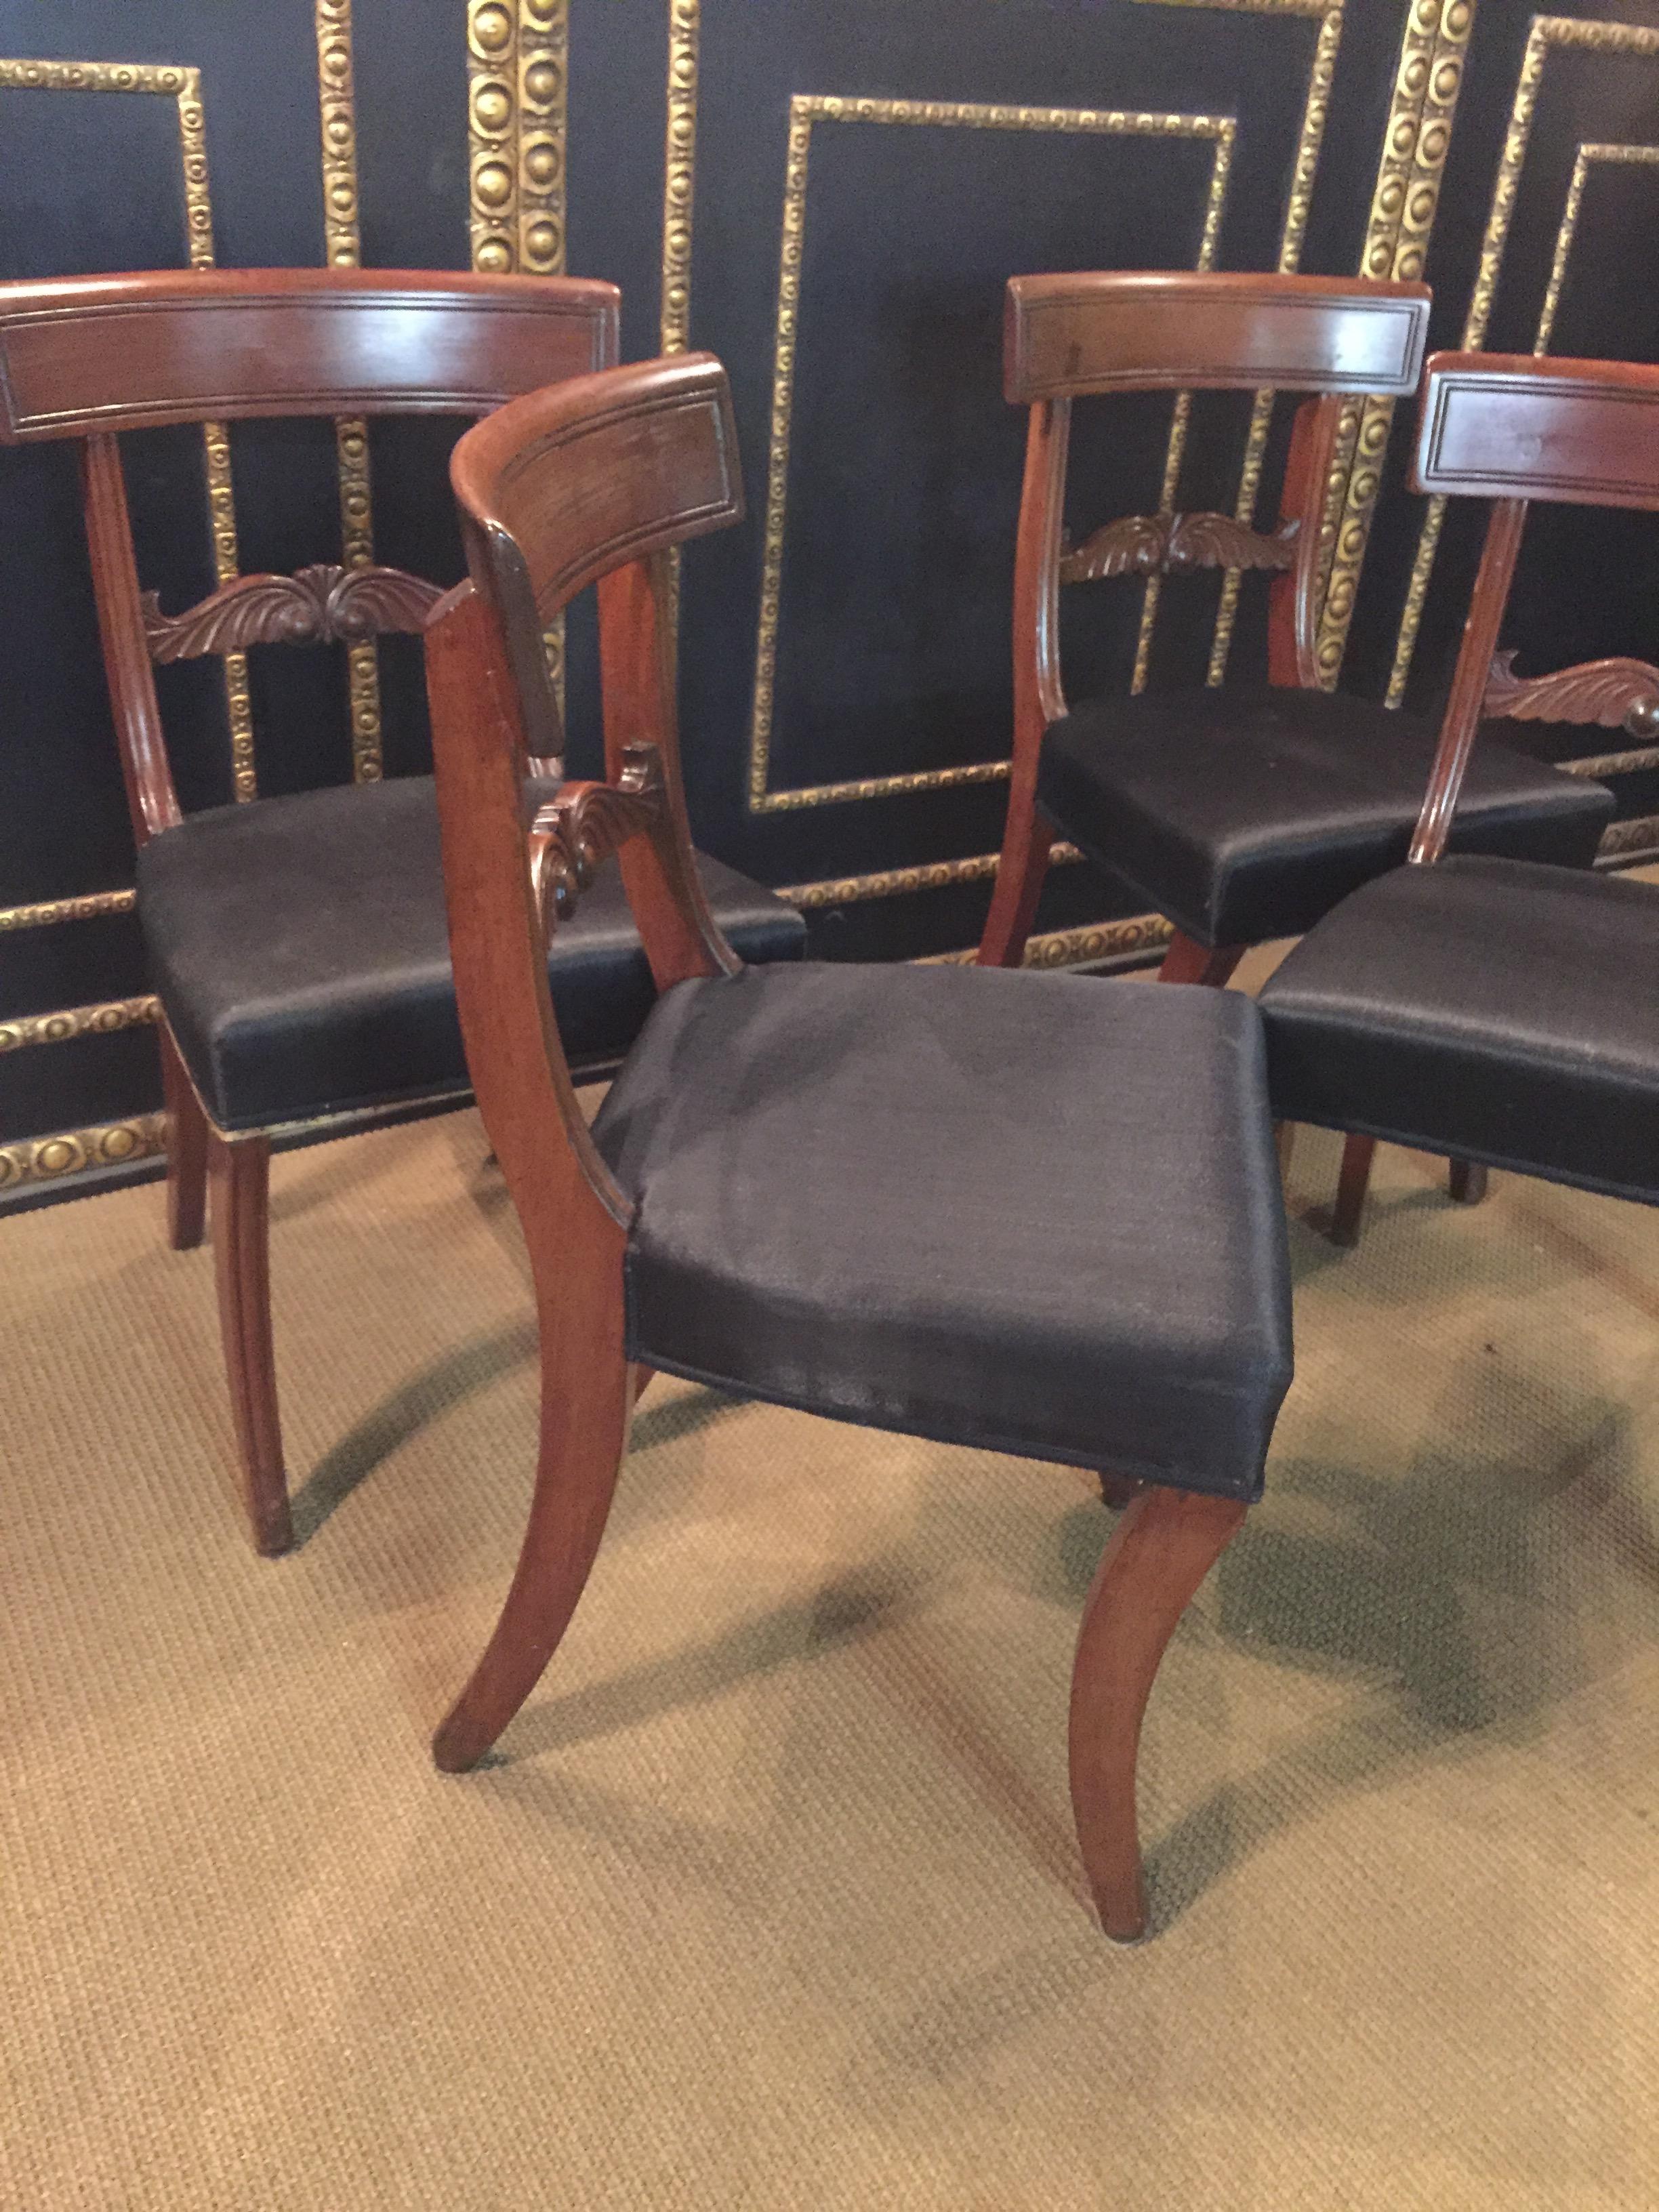 19th Century 4 Biedermeier Saber-Legs Chairs Are Solid Mahogany 2